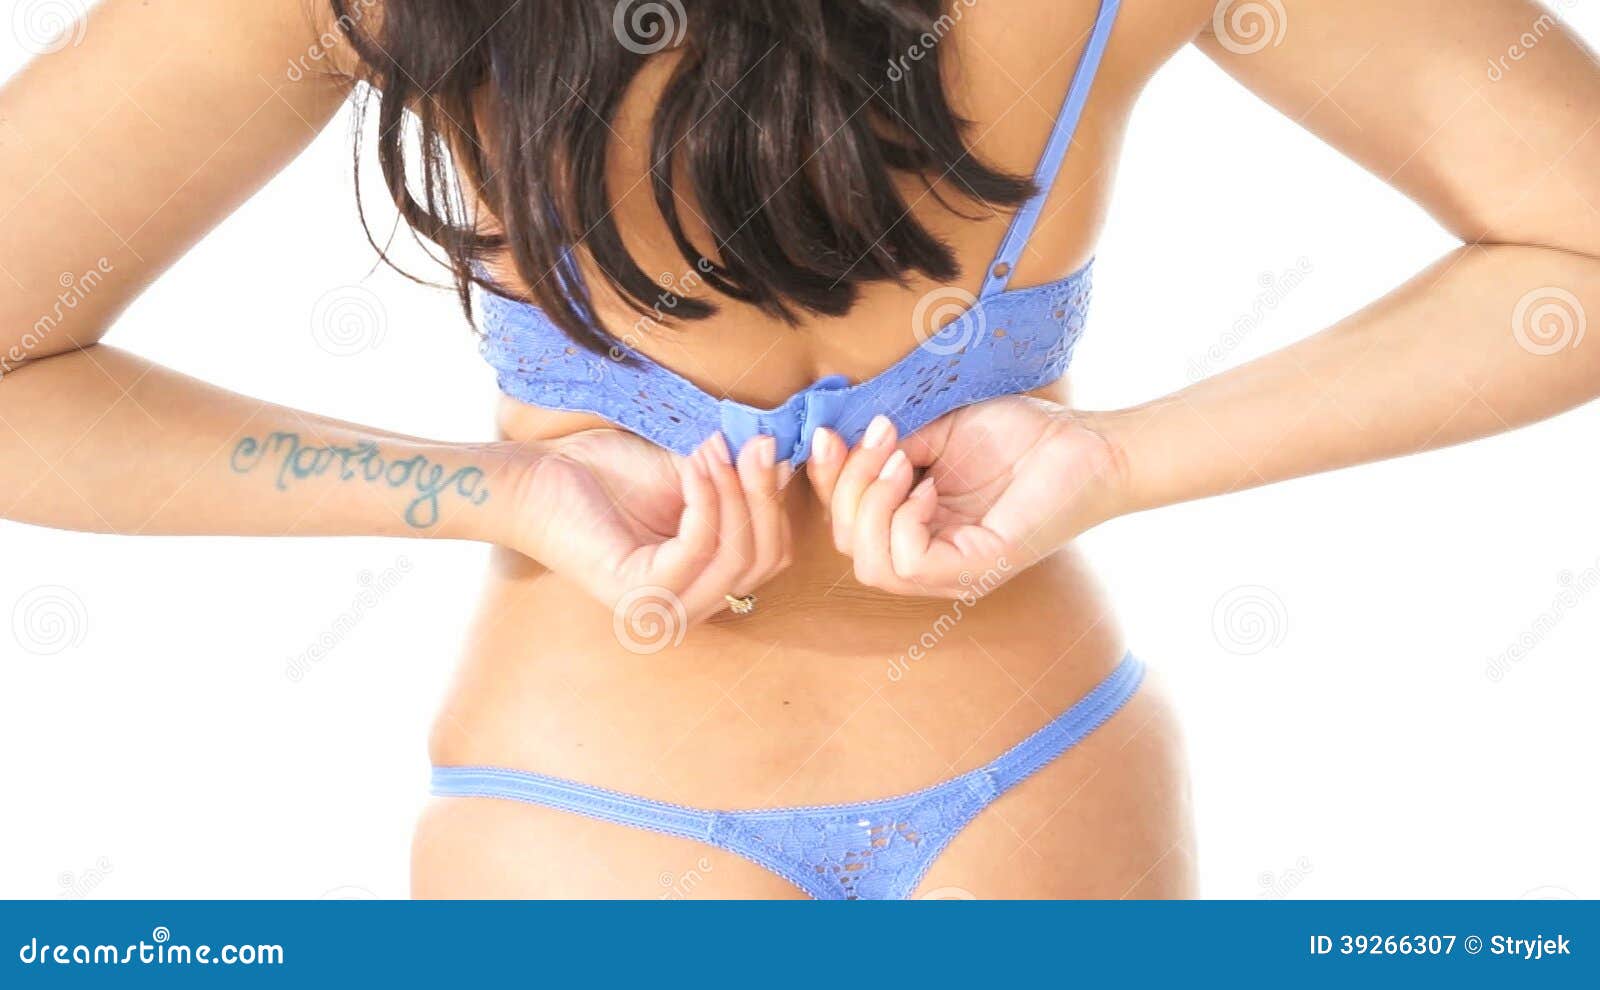 https://thumbs.dreamstime.com/z/close-up-young-woman-putting-her-bra-bed-39266307.jpg